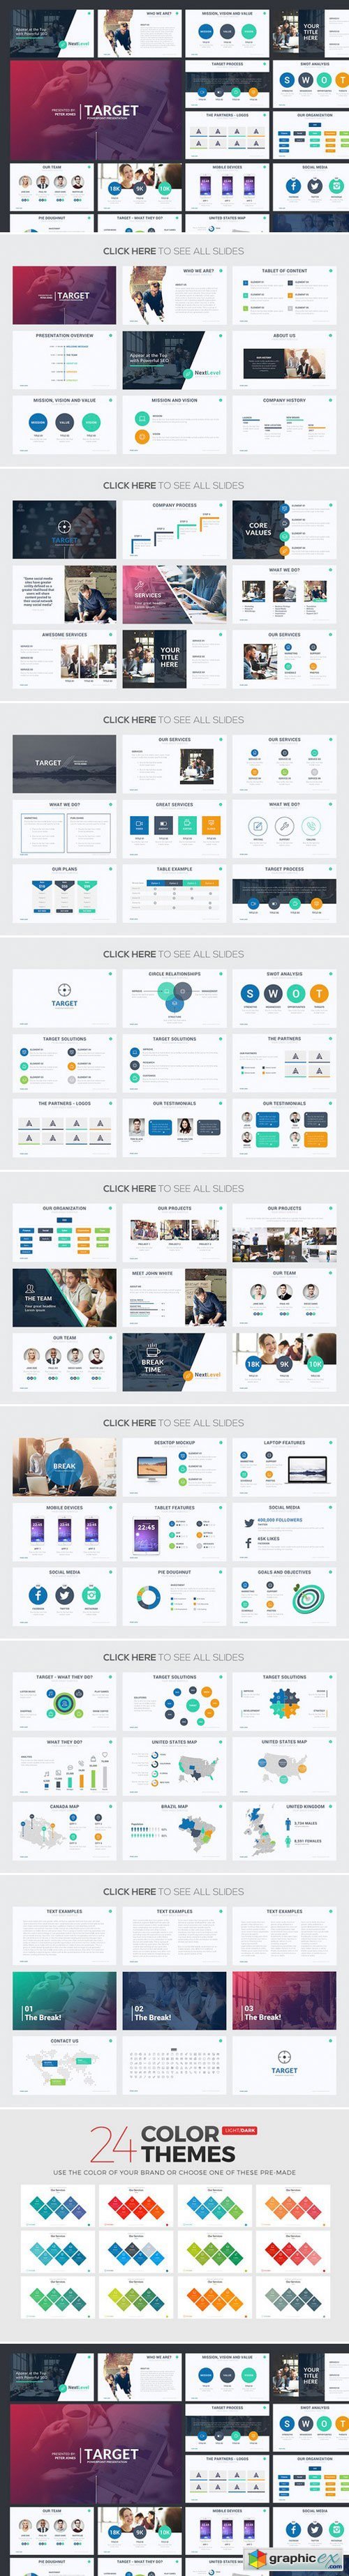 Target Powerpoint Template